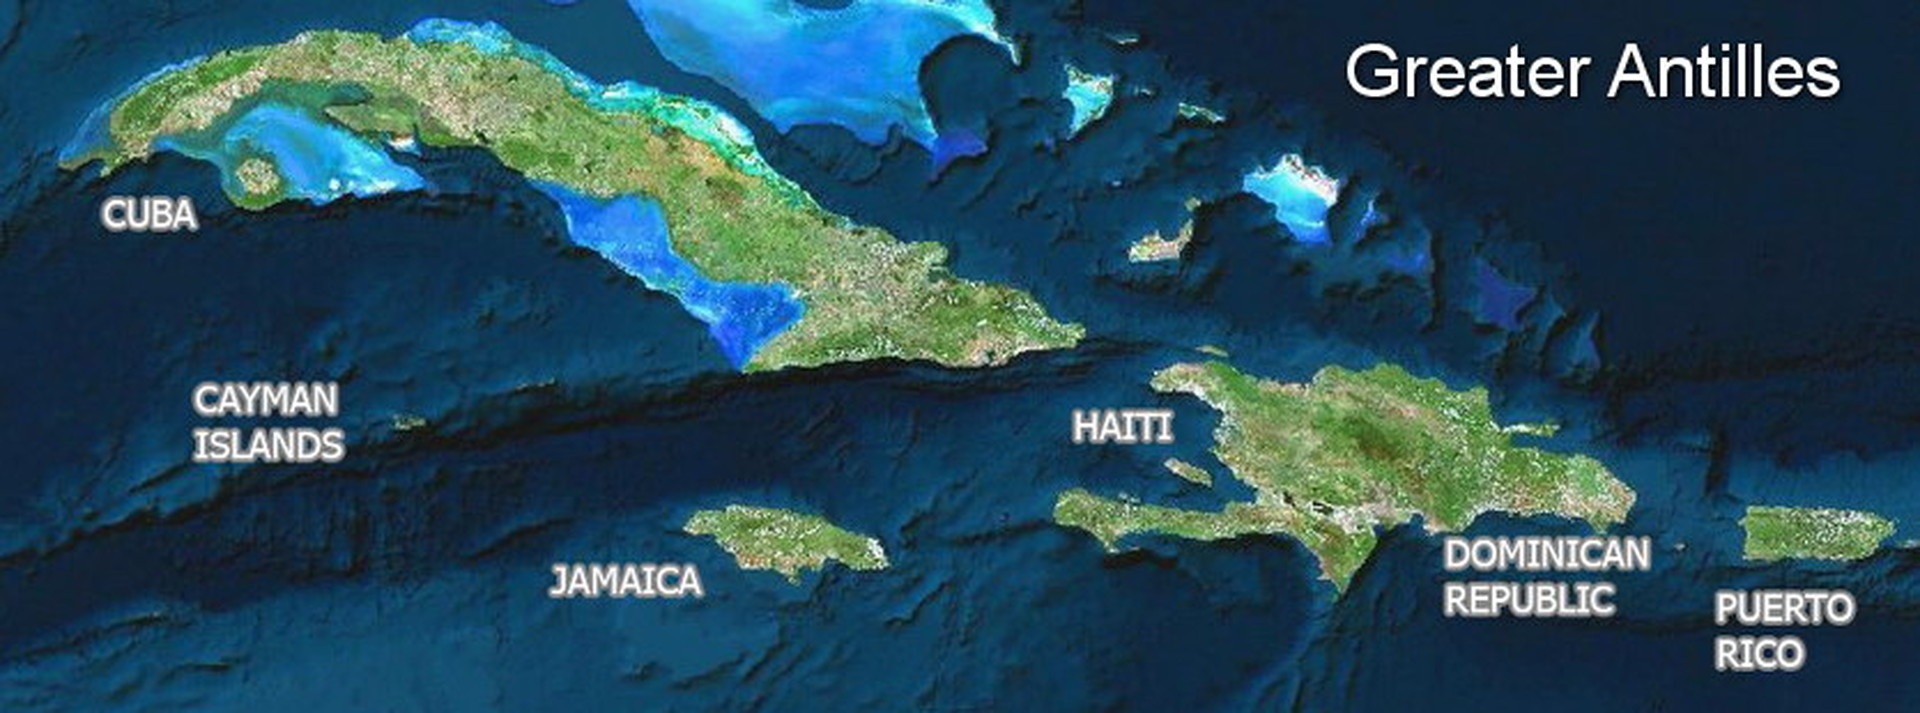 The Greater Antilles map